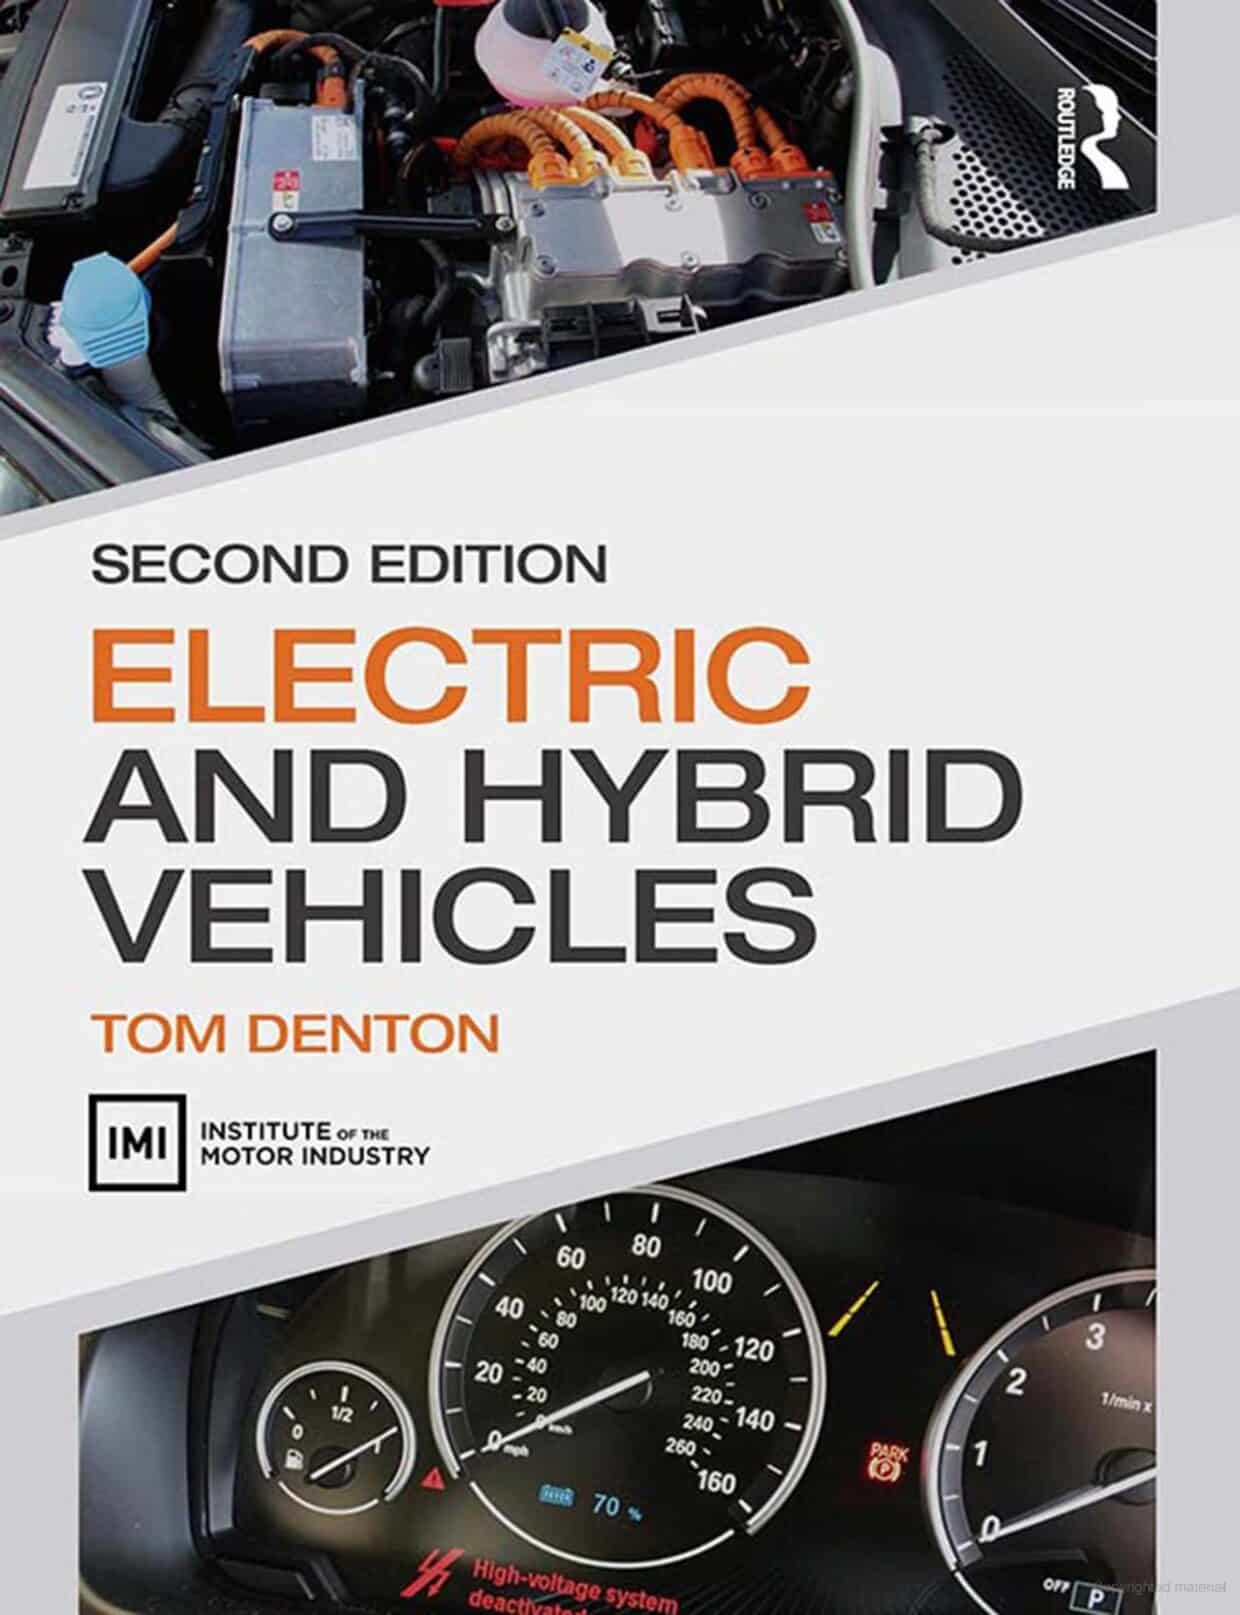 Textbook: Electric and Hybrid Vehicles - 2nd Edition